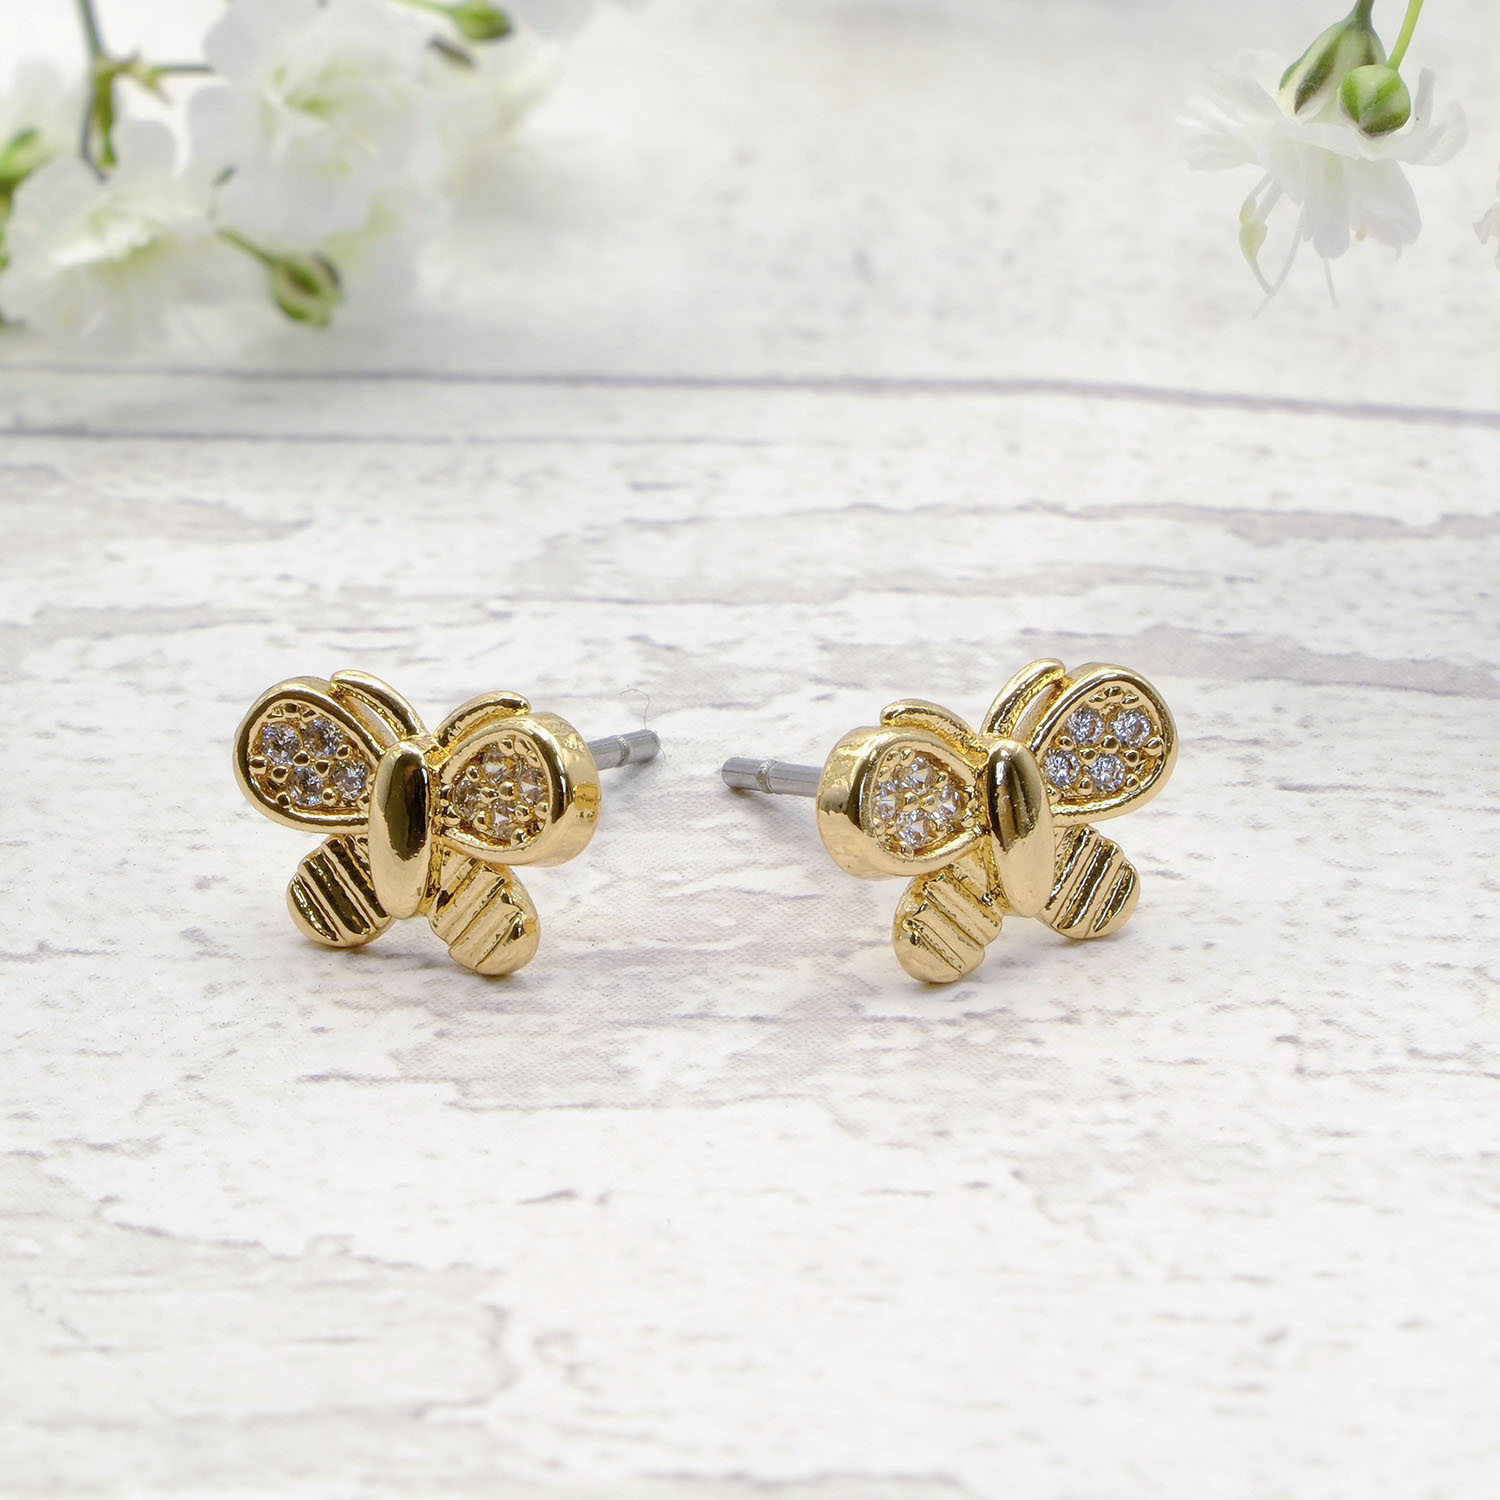 Gold Butterfly Studs With Crystal Insert - Gold Butterfly Studs With Crystal Insert GTK30 3